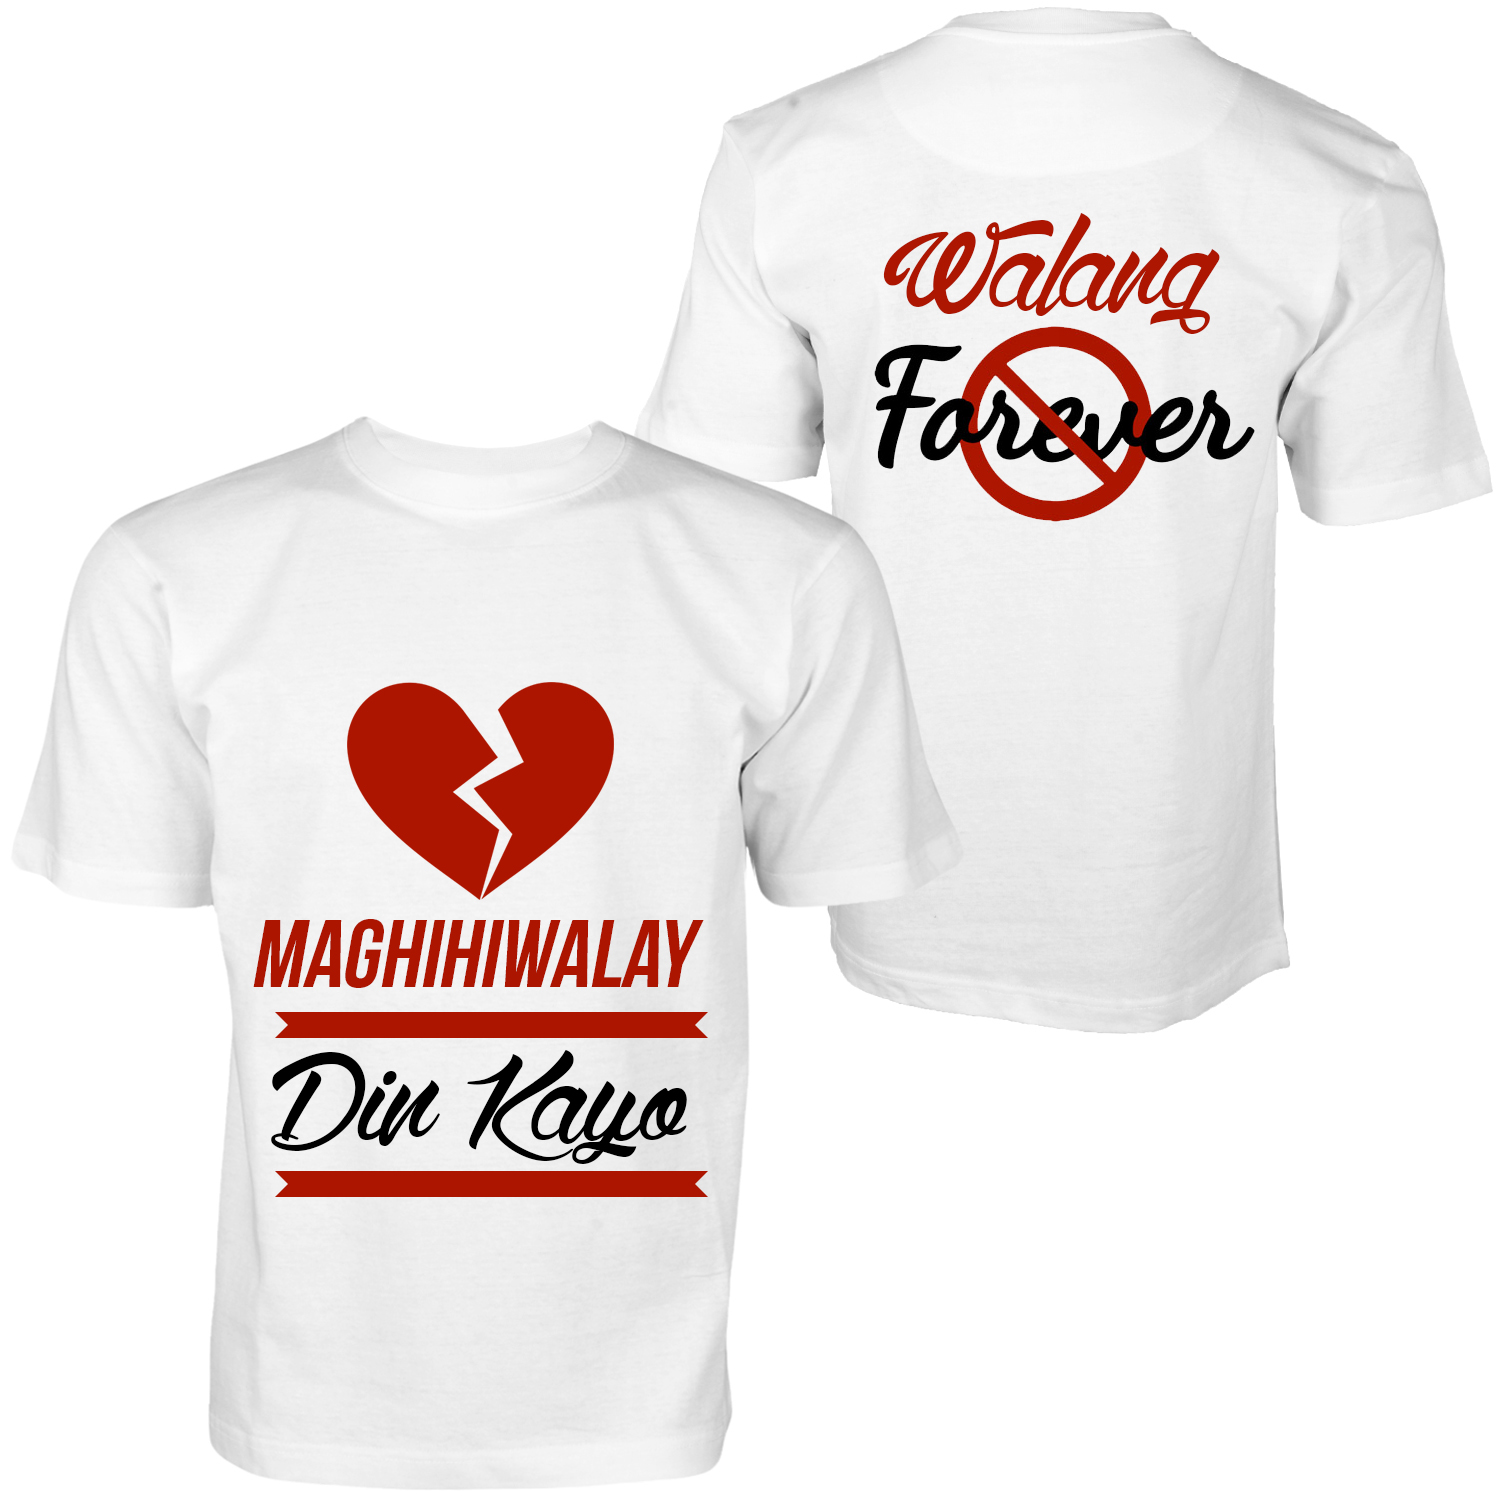 walang_forever___shirt_design_by_isyncx-d8tezyc.jpg